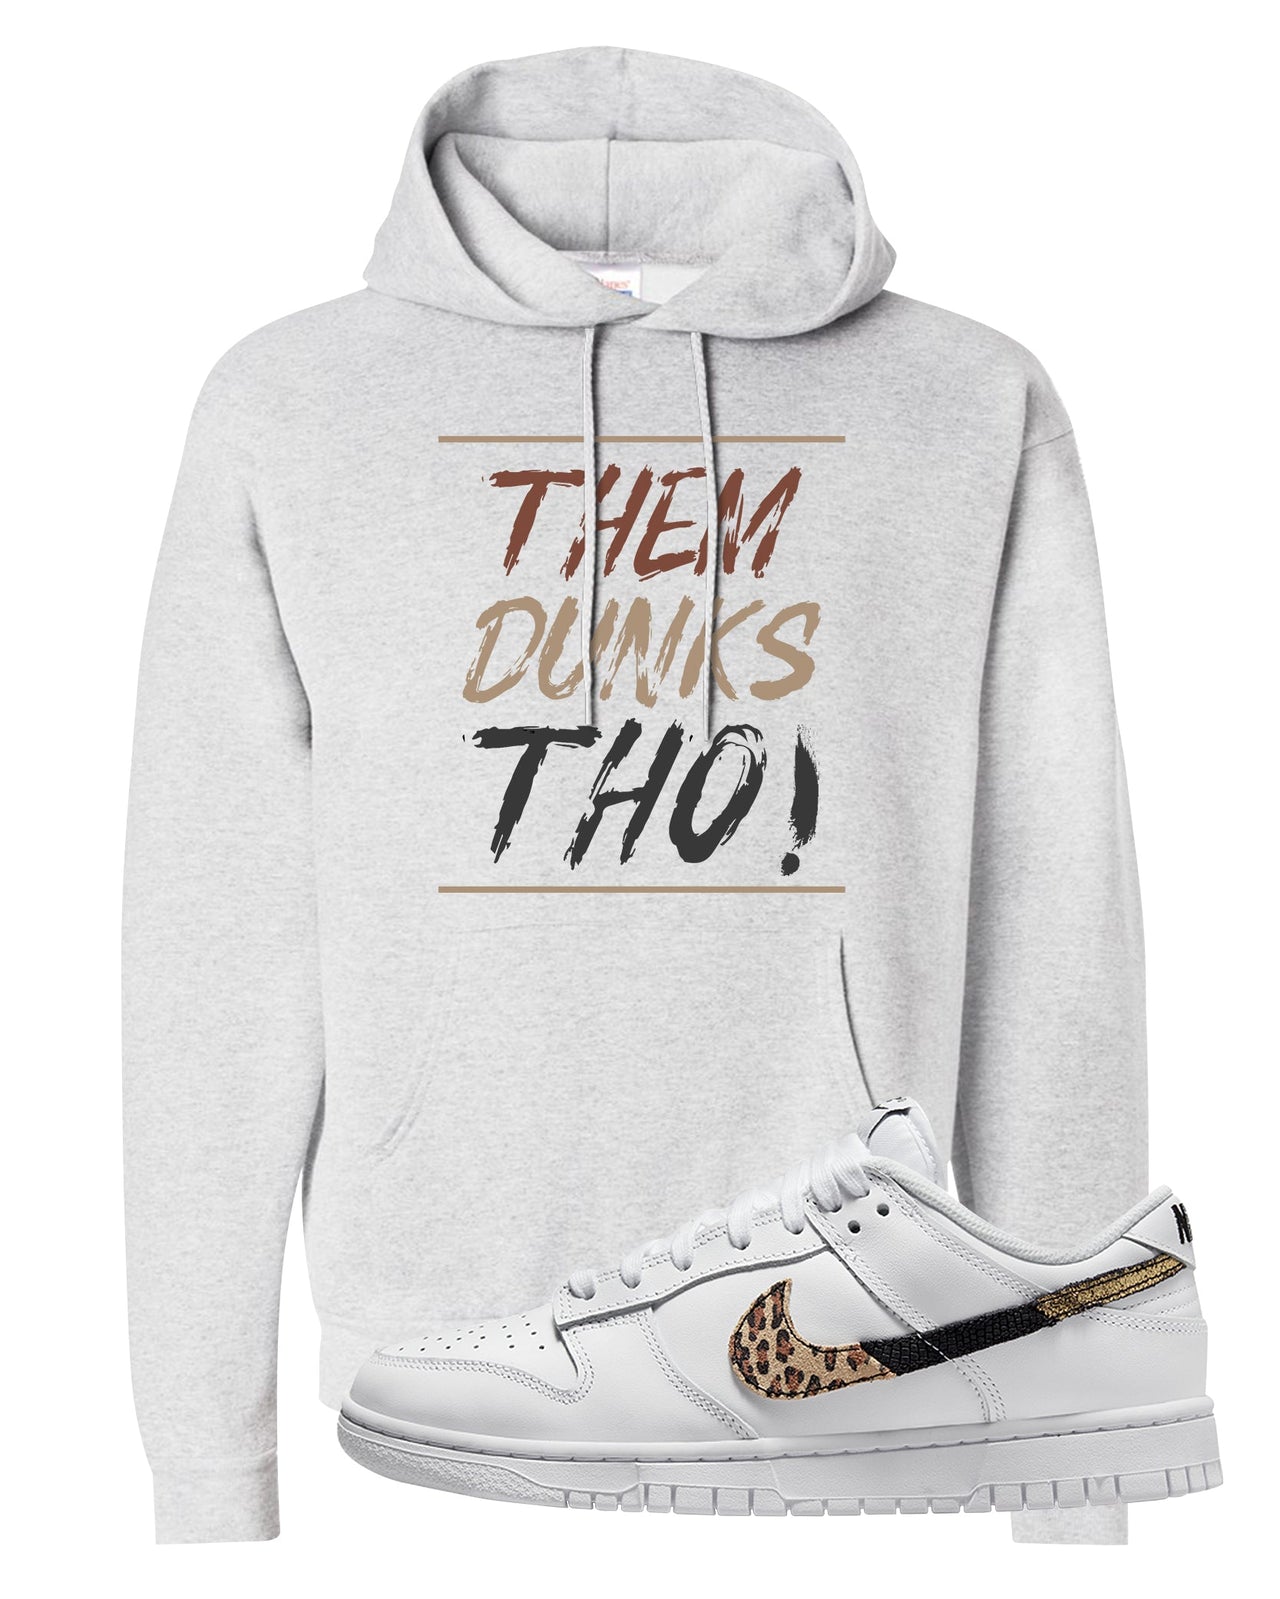 Primal White Leopard Low Dunks Hoodie | Them Dunks Tho, Ash